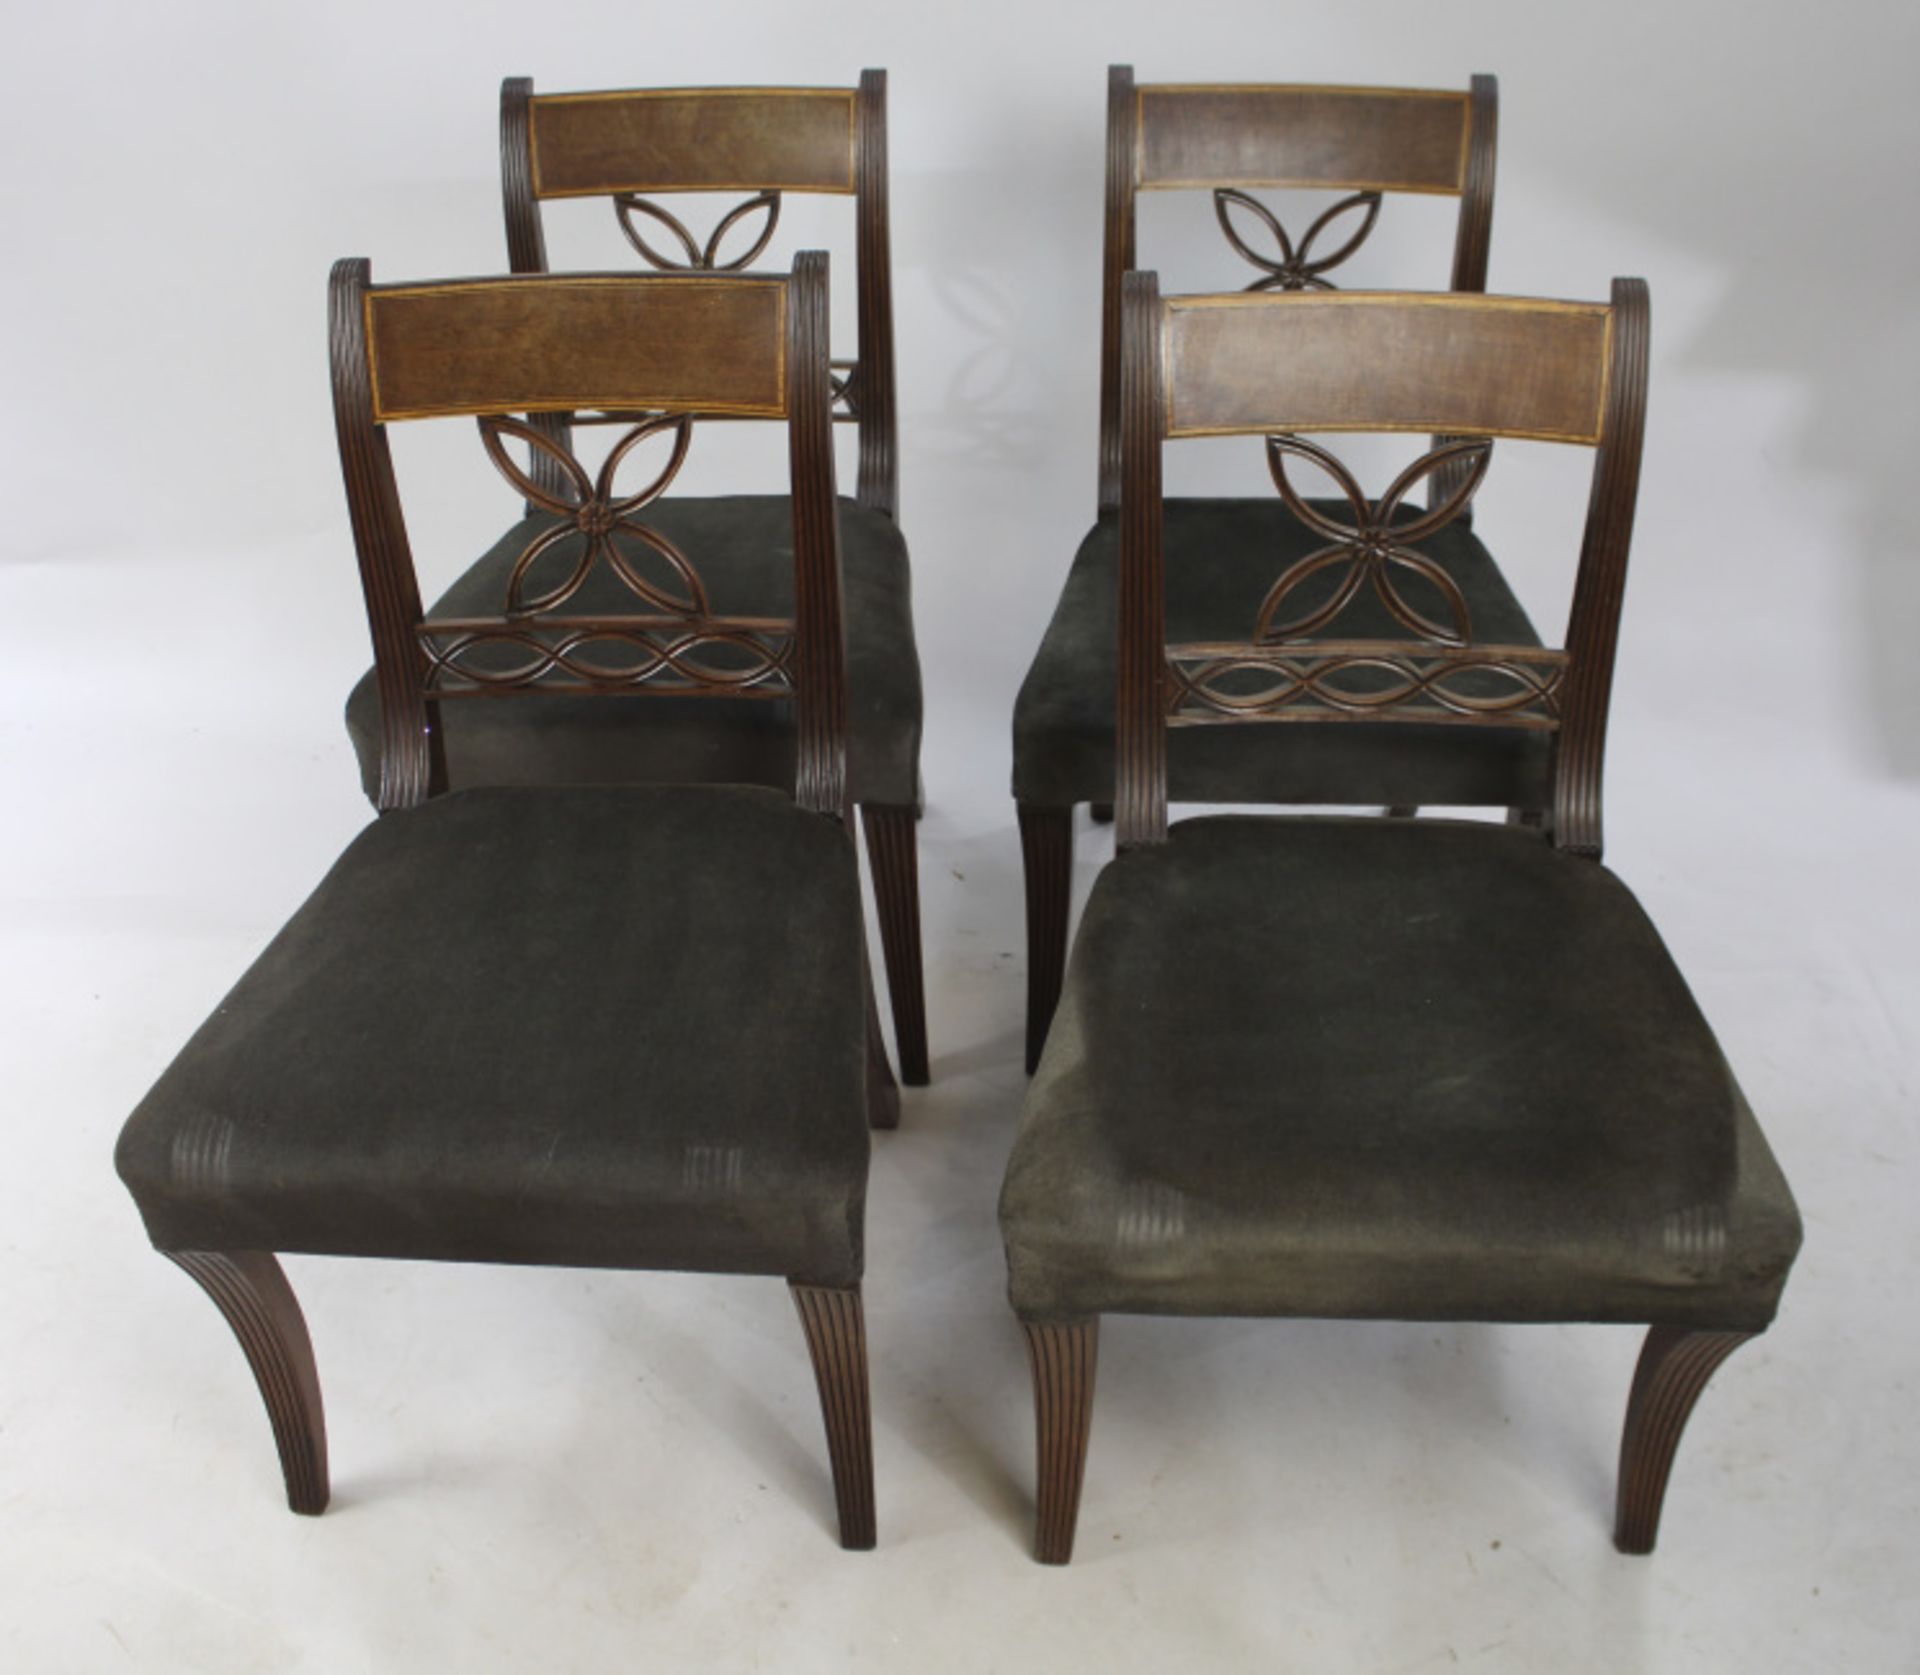 Set of 4 Early 19th c. Mahogany Chairs - Image 2 of 4